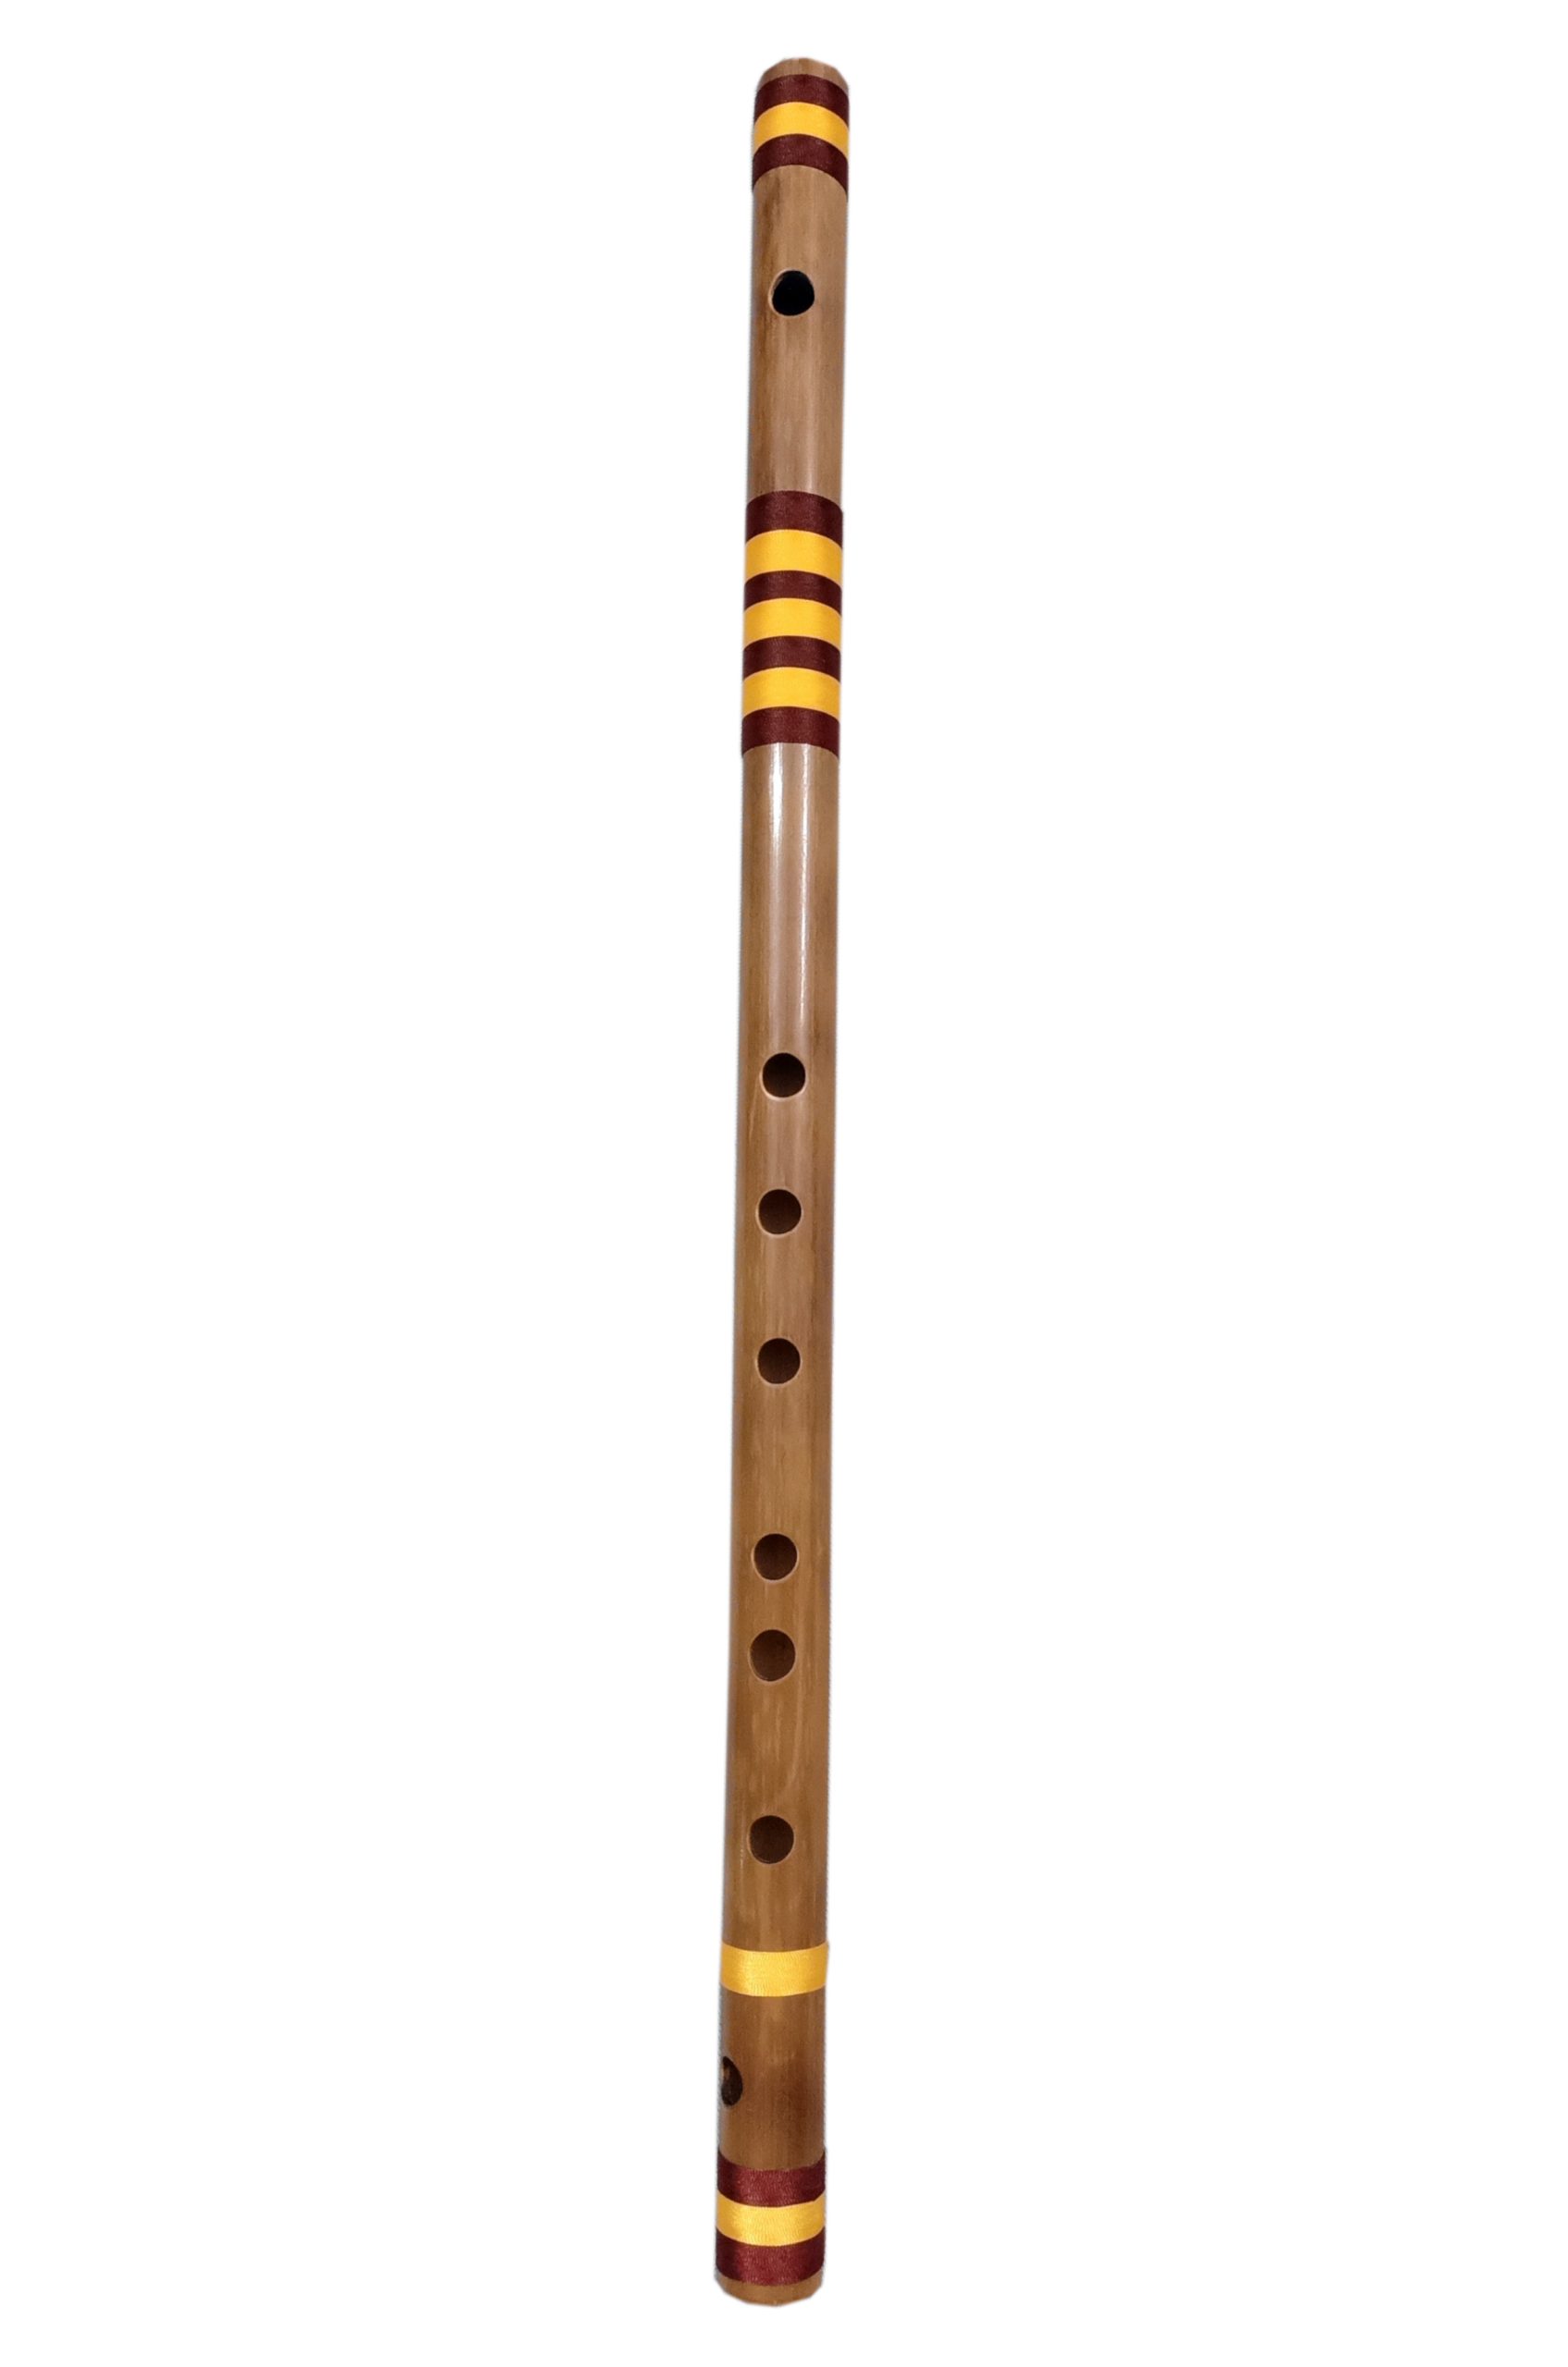 Special Effect Middle bamboo flutes